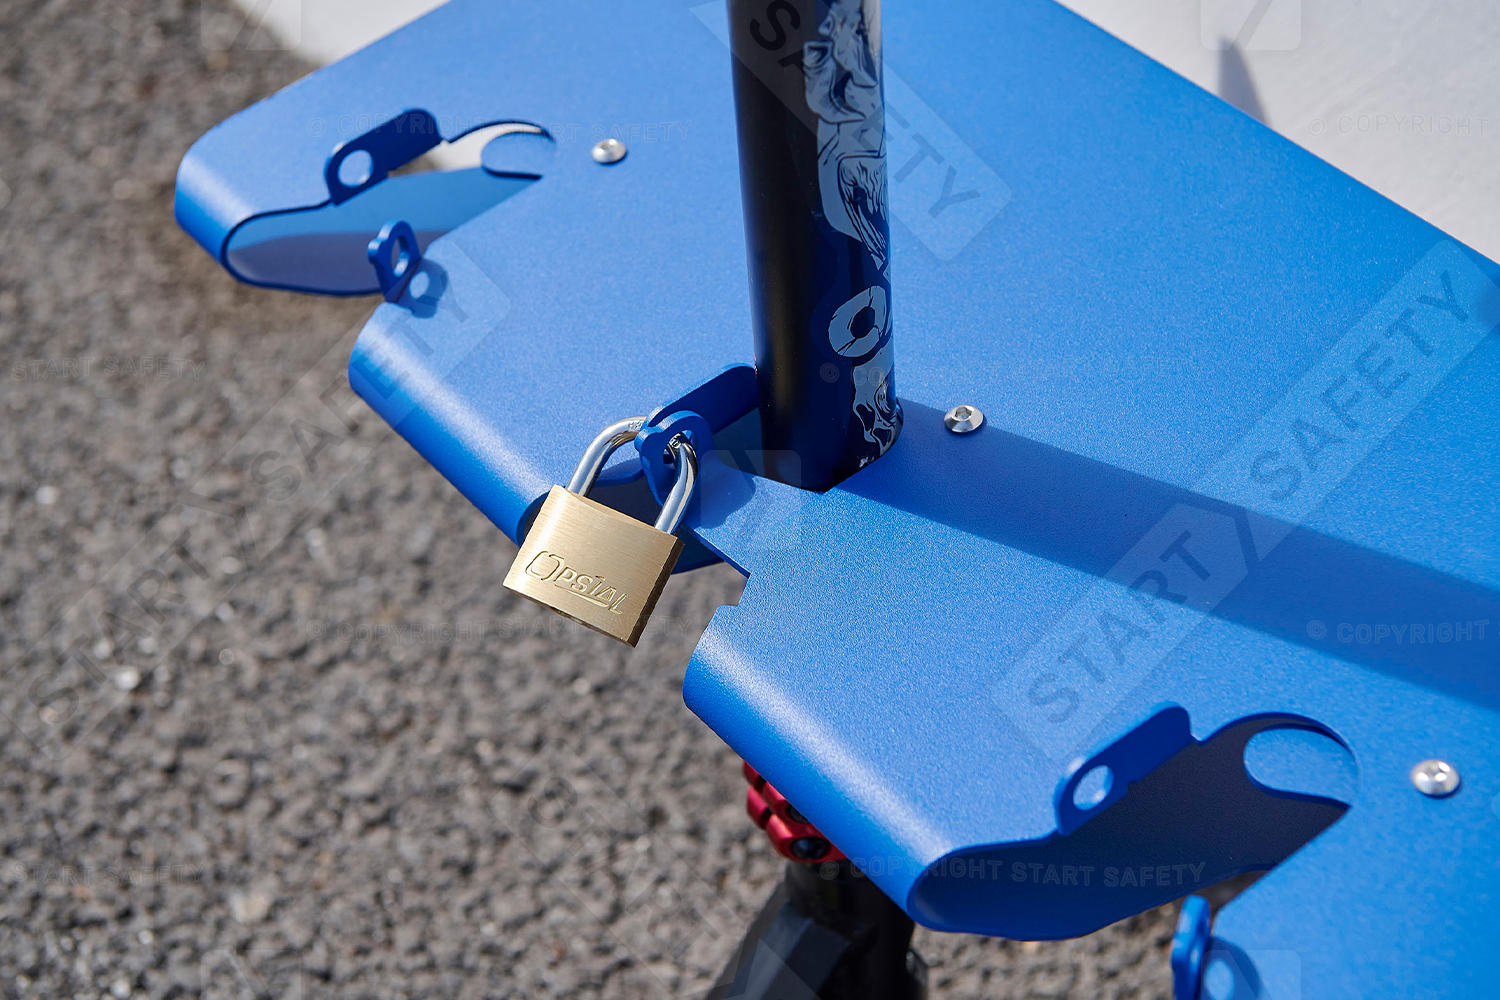 Scooter Rack With Scooter Locked Closeup